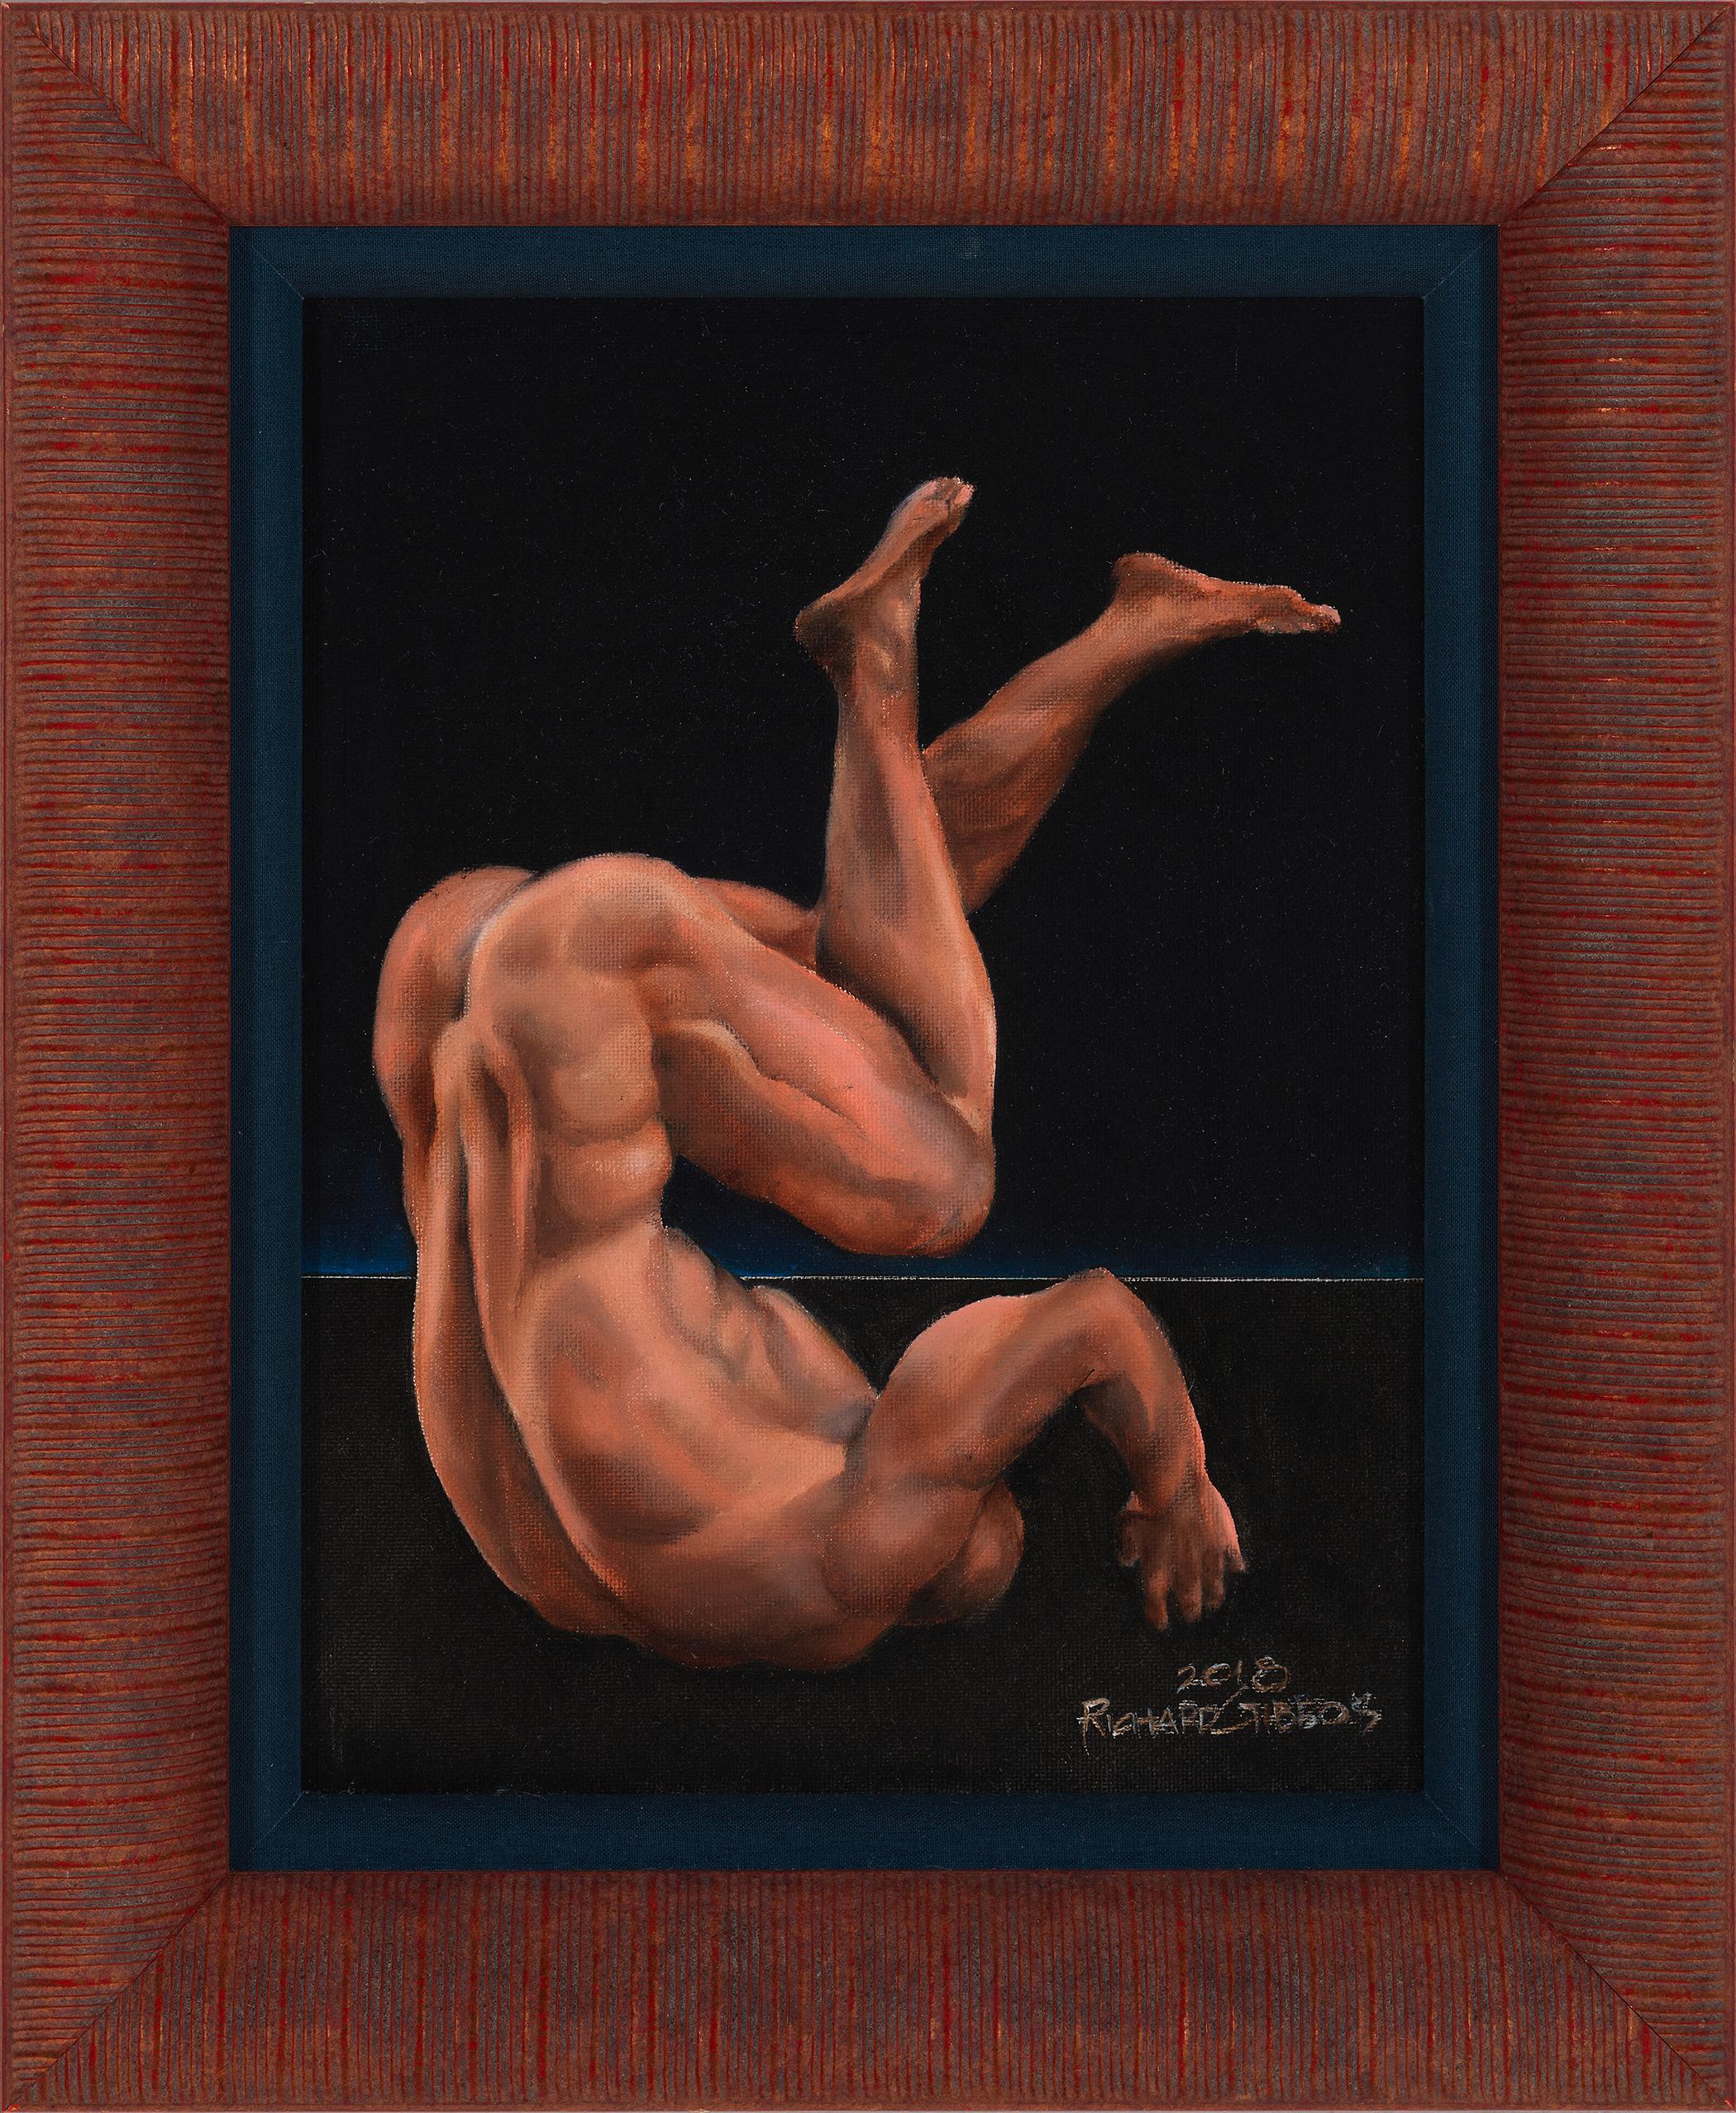 Richard Gibbons Figurative Painting - Icarus - Nude Male Tumbling Downward on Black Background, Oil on Panel